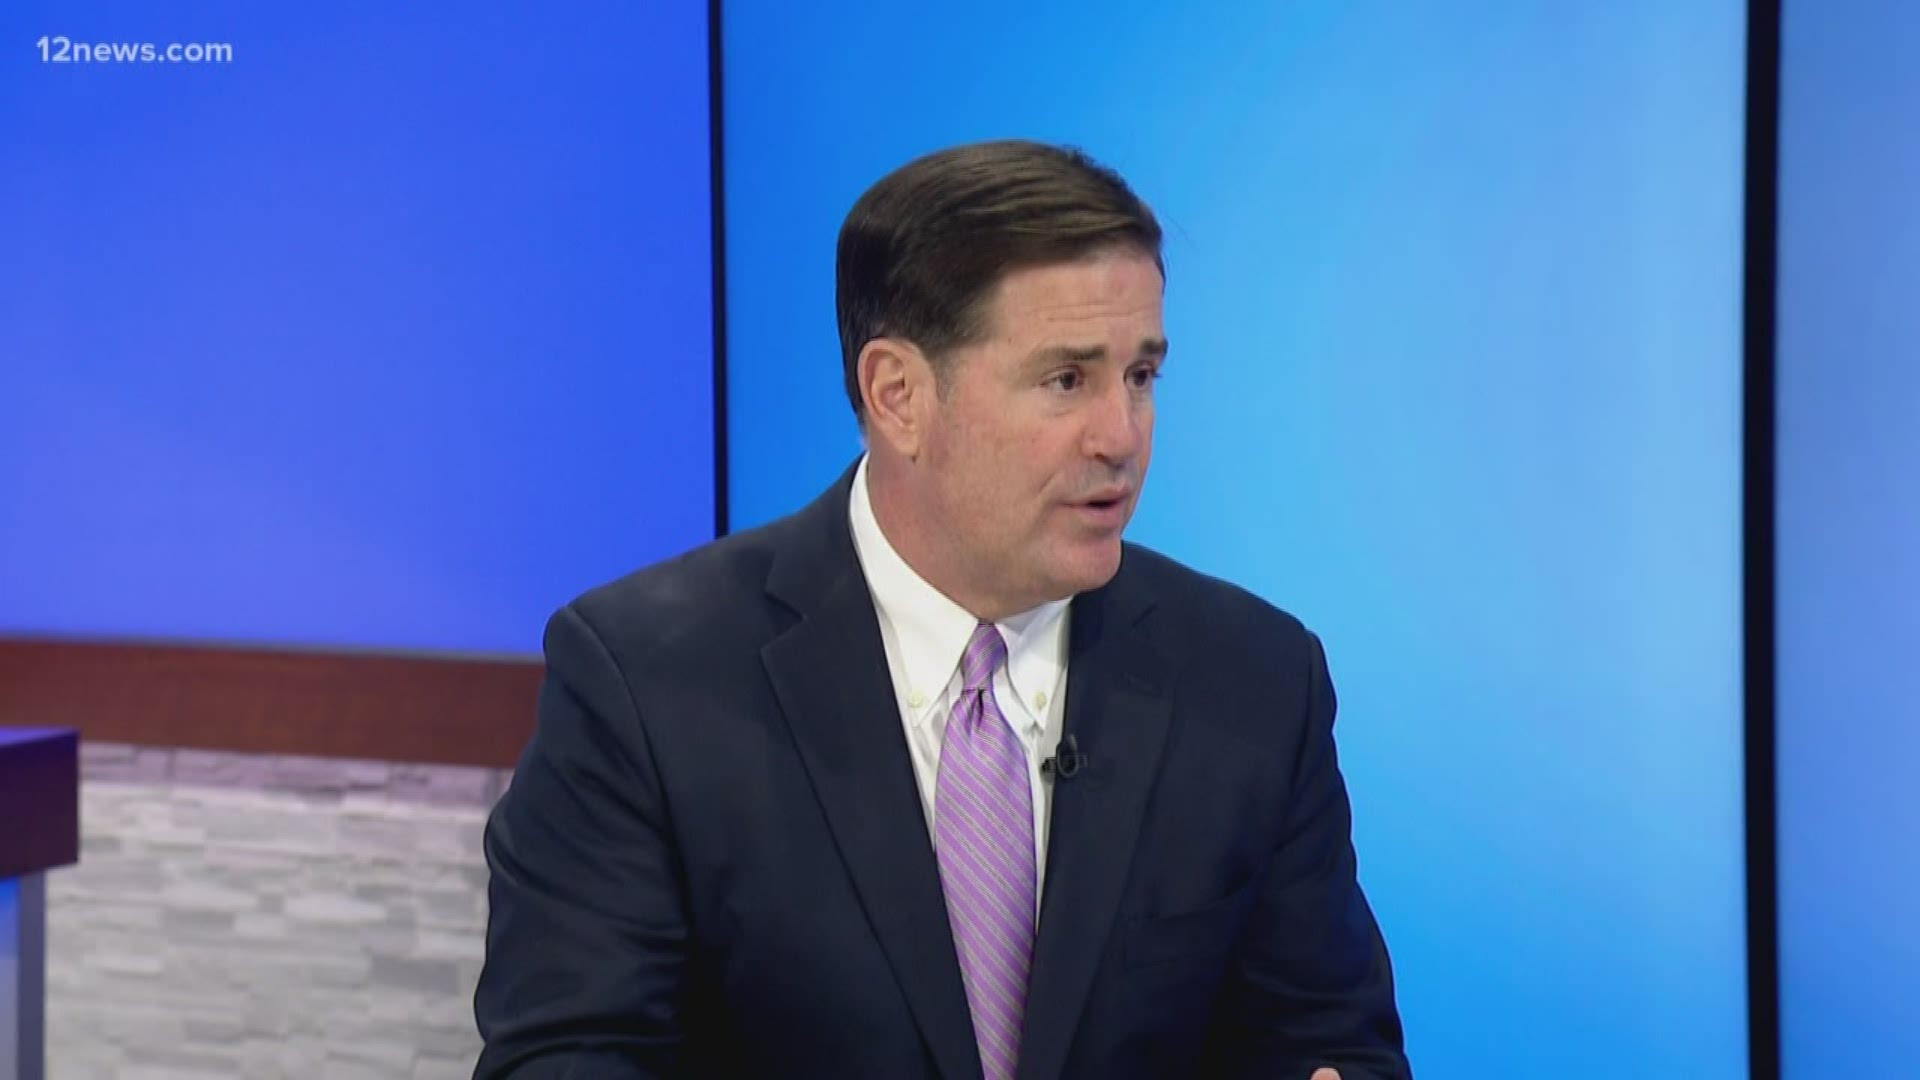 A 12 News viewer asked a question for Arizona Governor Doug Ducey: What will you do to protect DACA?